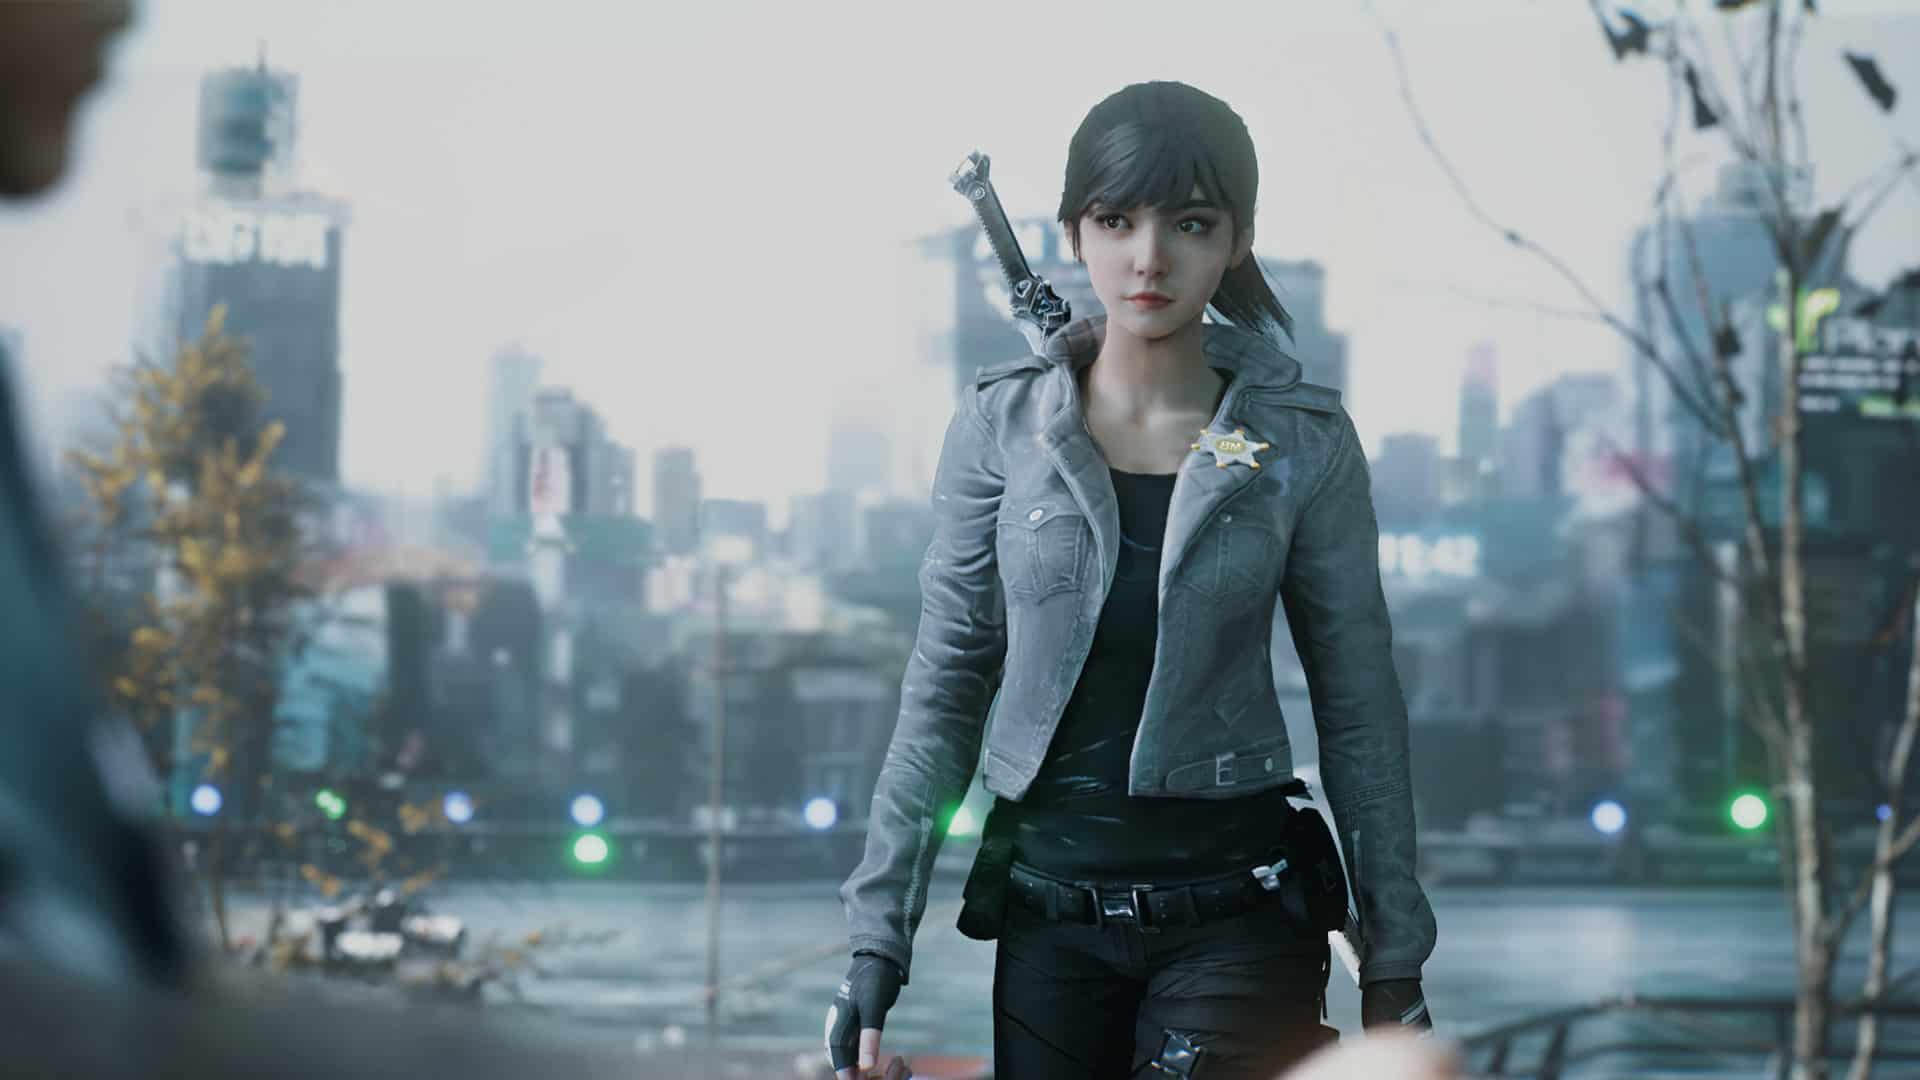 Bright Memory Infinite: Shelia can be seen walking towards the camera with a skyscraper cityscape behind her.